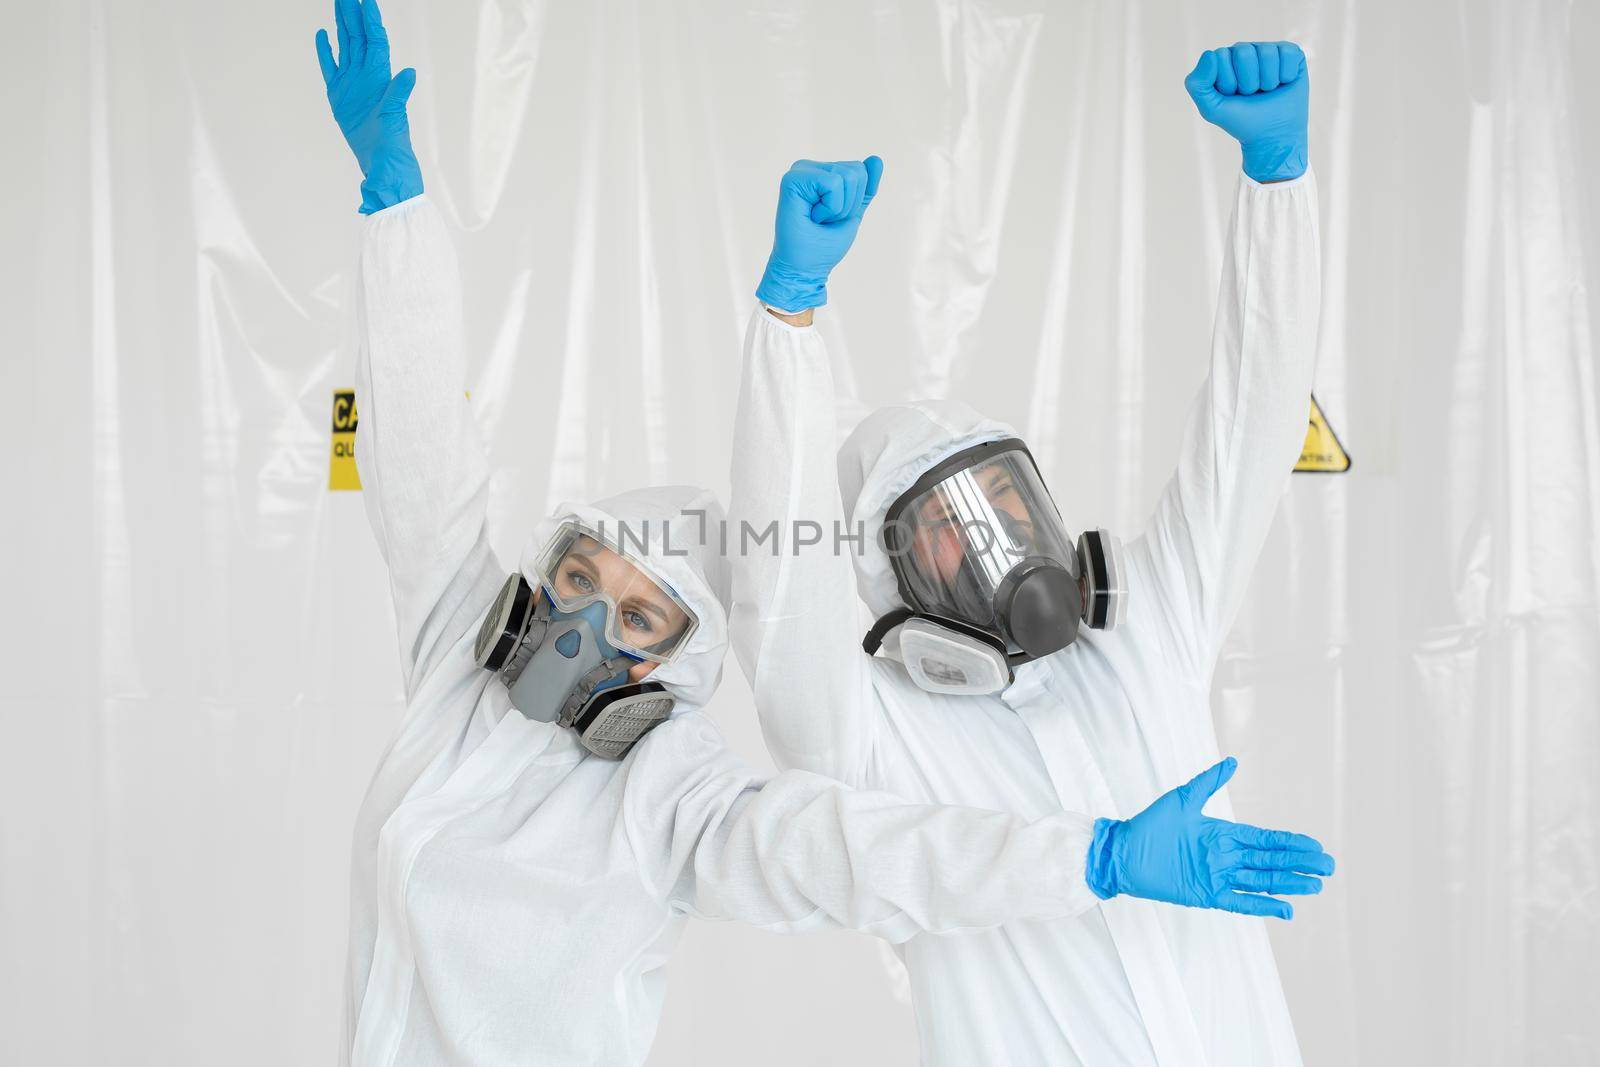 Portraits of a doctor: a man and a woman in protective suits and respirators, wearing gloves, having fun during quarantine. Covid-19.